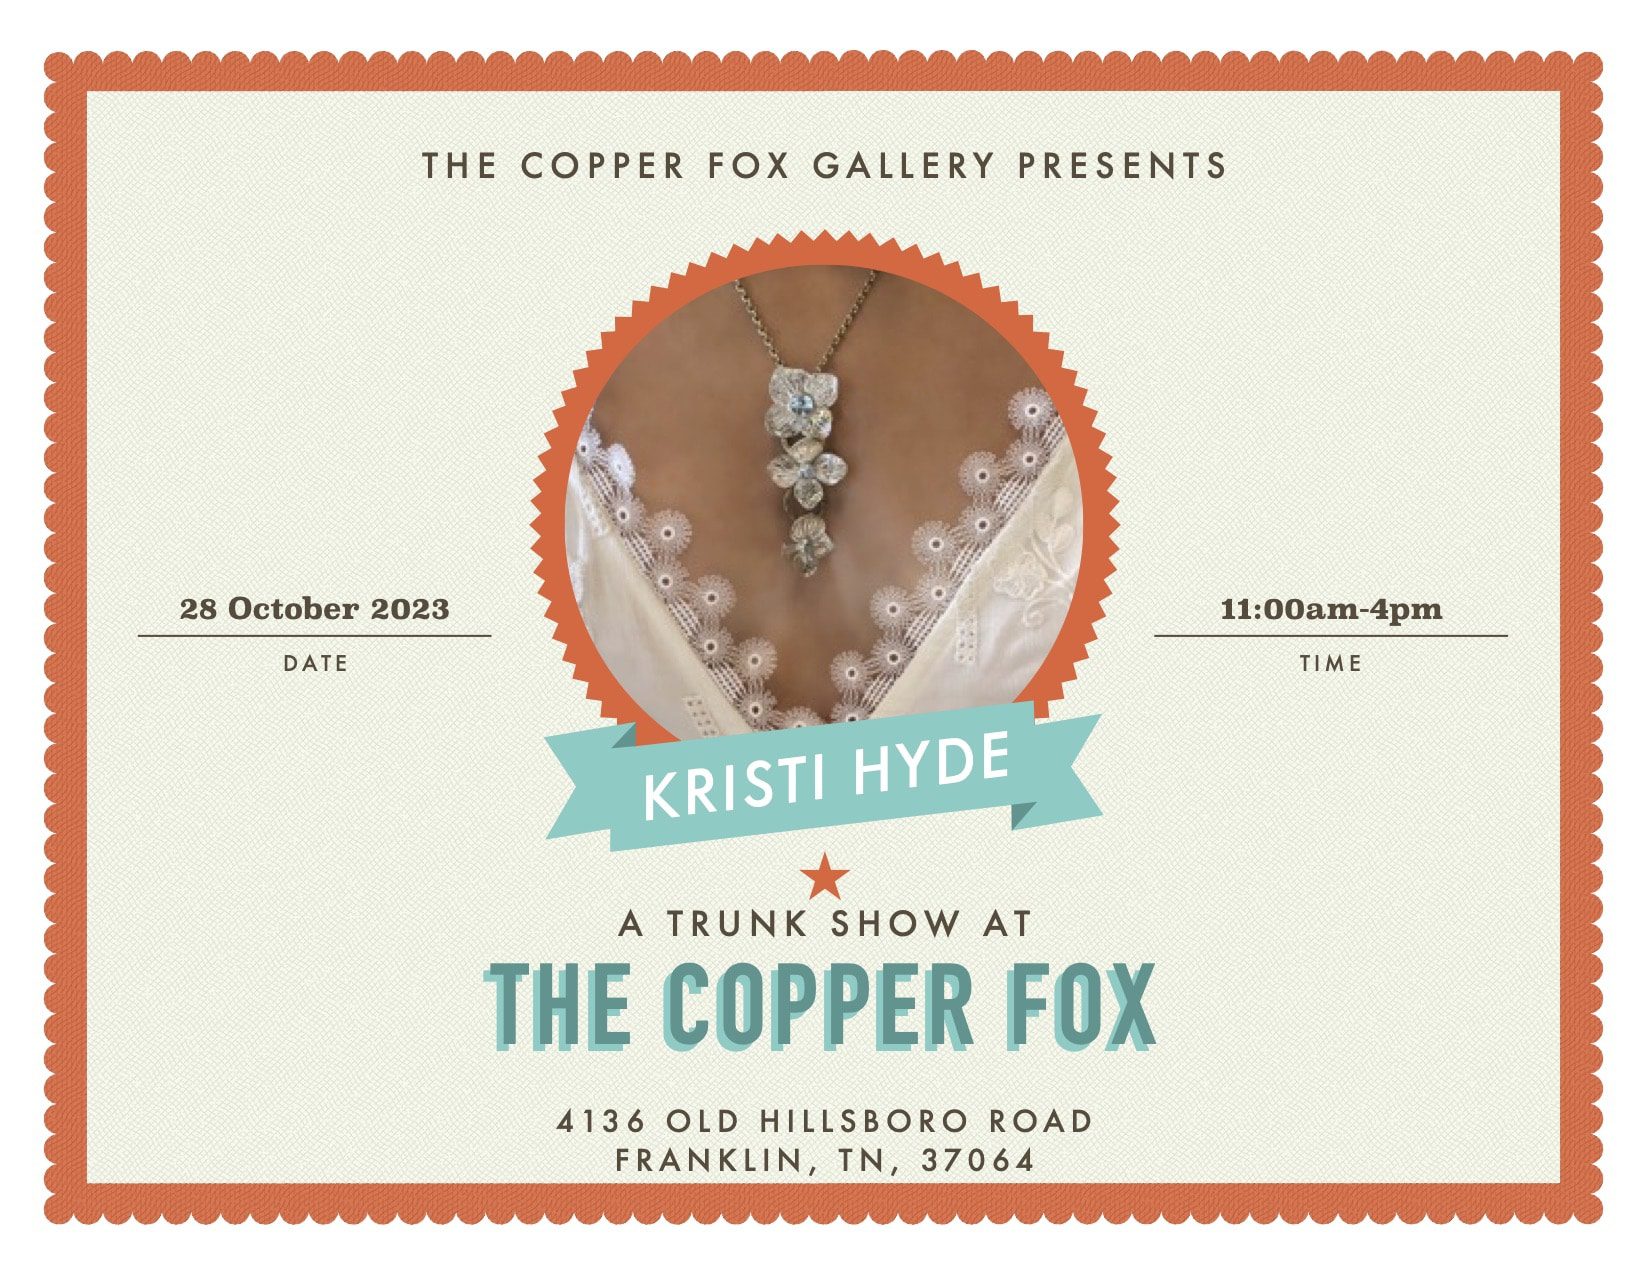 Kristi Hyde Trunk Show, a Lieper's Fork, TN event at The Copper Fox Gallery.